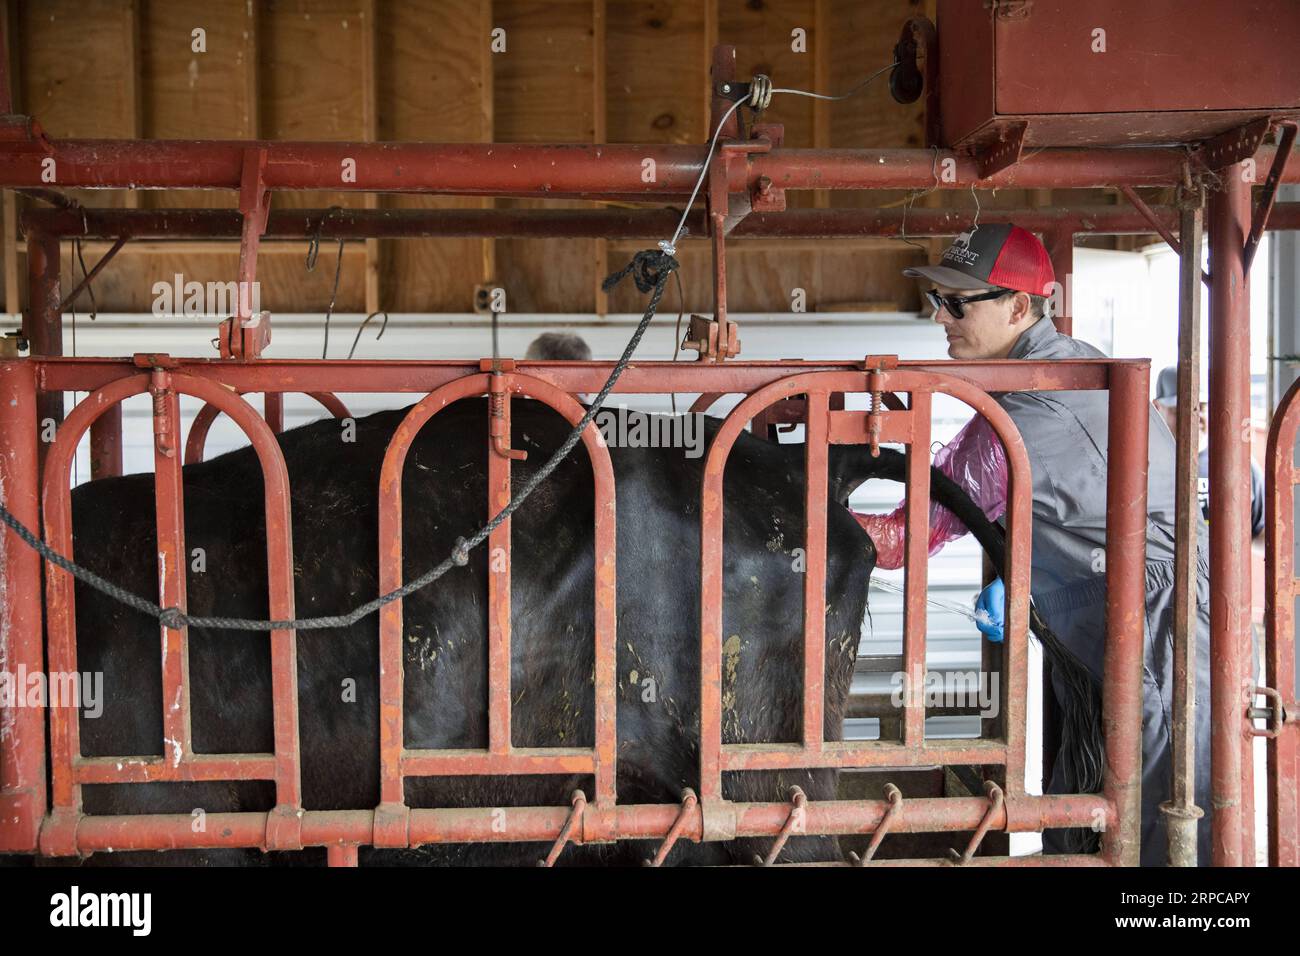 (190629) -- ATLANTIC (U.S.), June 29, 2019 -- Cody Ham, Bill Pellett s long-time business partner Phil Ham s son, carries out artificial insemination procedures on Bill Pellett s farm in Atlantic, Iowa, the United States, on June 20, 2019. Bill Pellett, a fifth-generation farmer in Atlantic, a small city in the U.S. Midwestern state of Iowa, has found a cost-effective way to raise better calves each year without purchasing new bulls -- artificial insemination (AI). ) TO GO WITH Feature: U.S. cattle farmer turns to artificial insemination for better quality beef U.S.-IOWA-ATLANTIC-CATTLE-ARTIFI Stock Photo